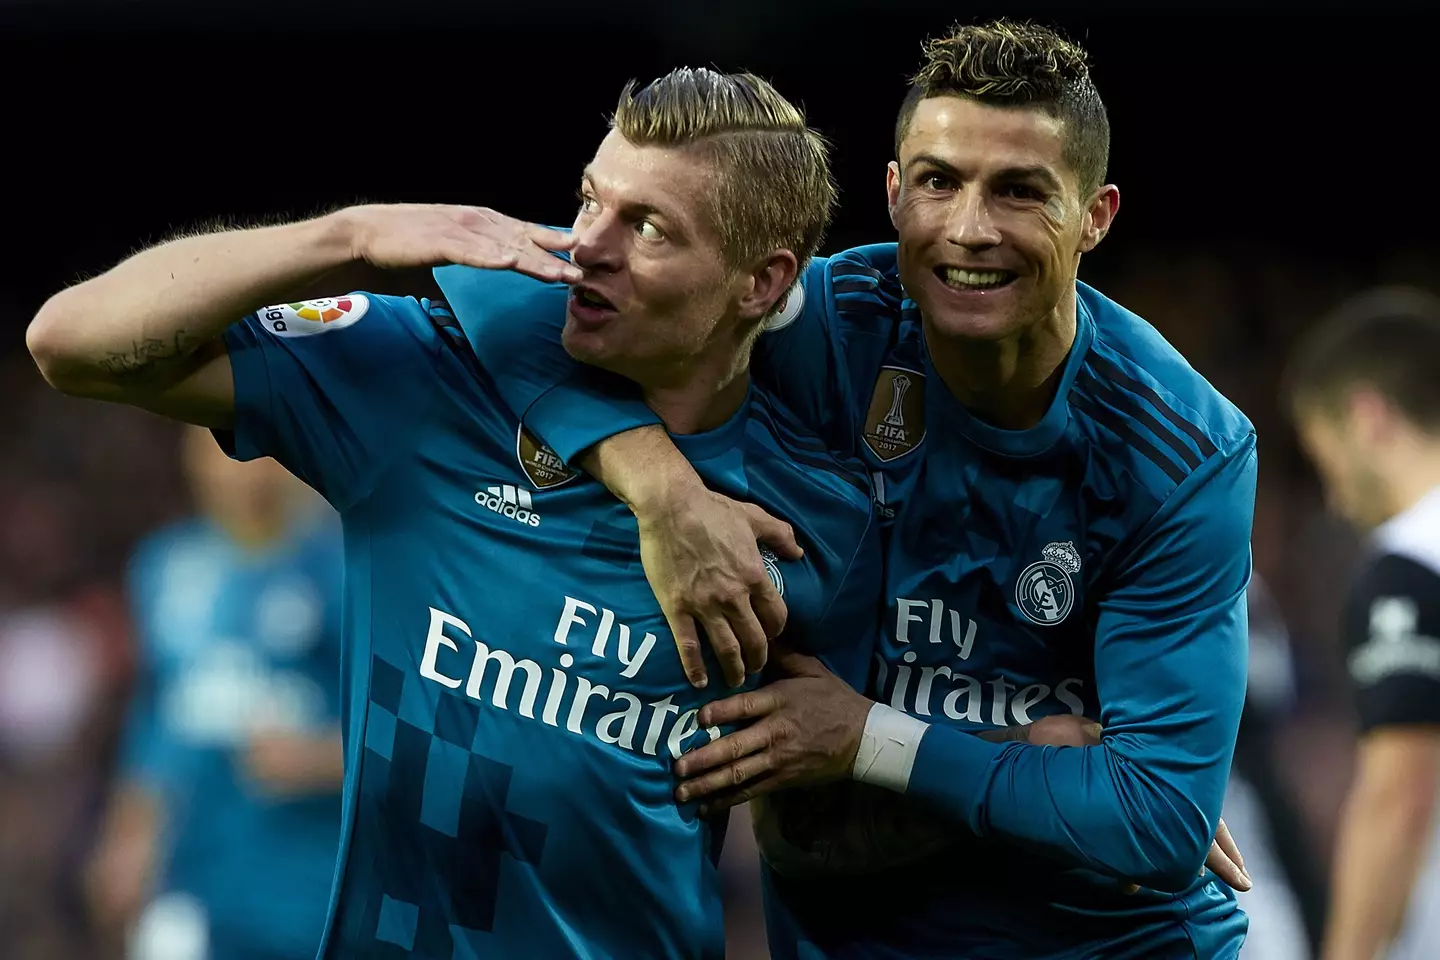 Kroos and Ronaldo during their time together at Real Madrid. (Image